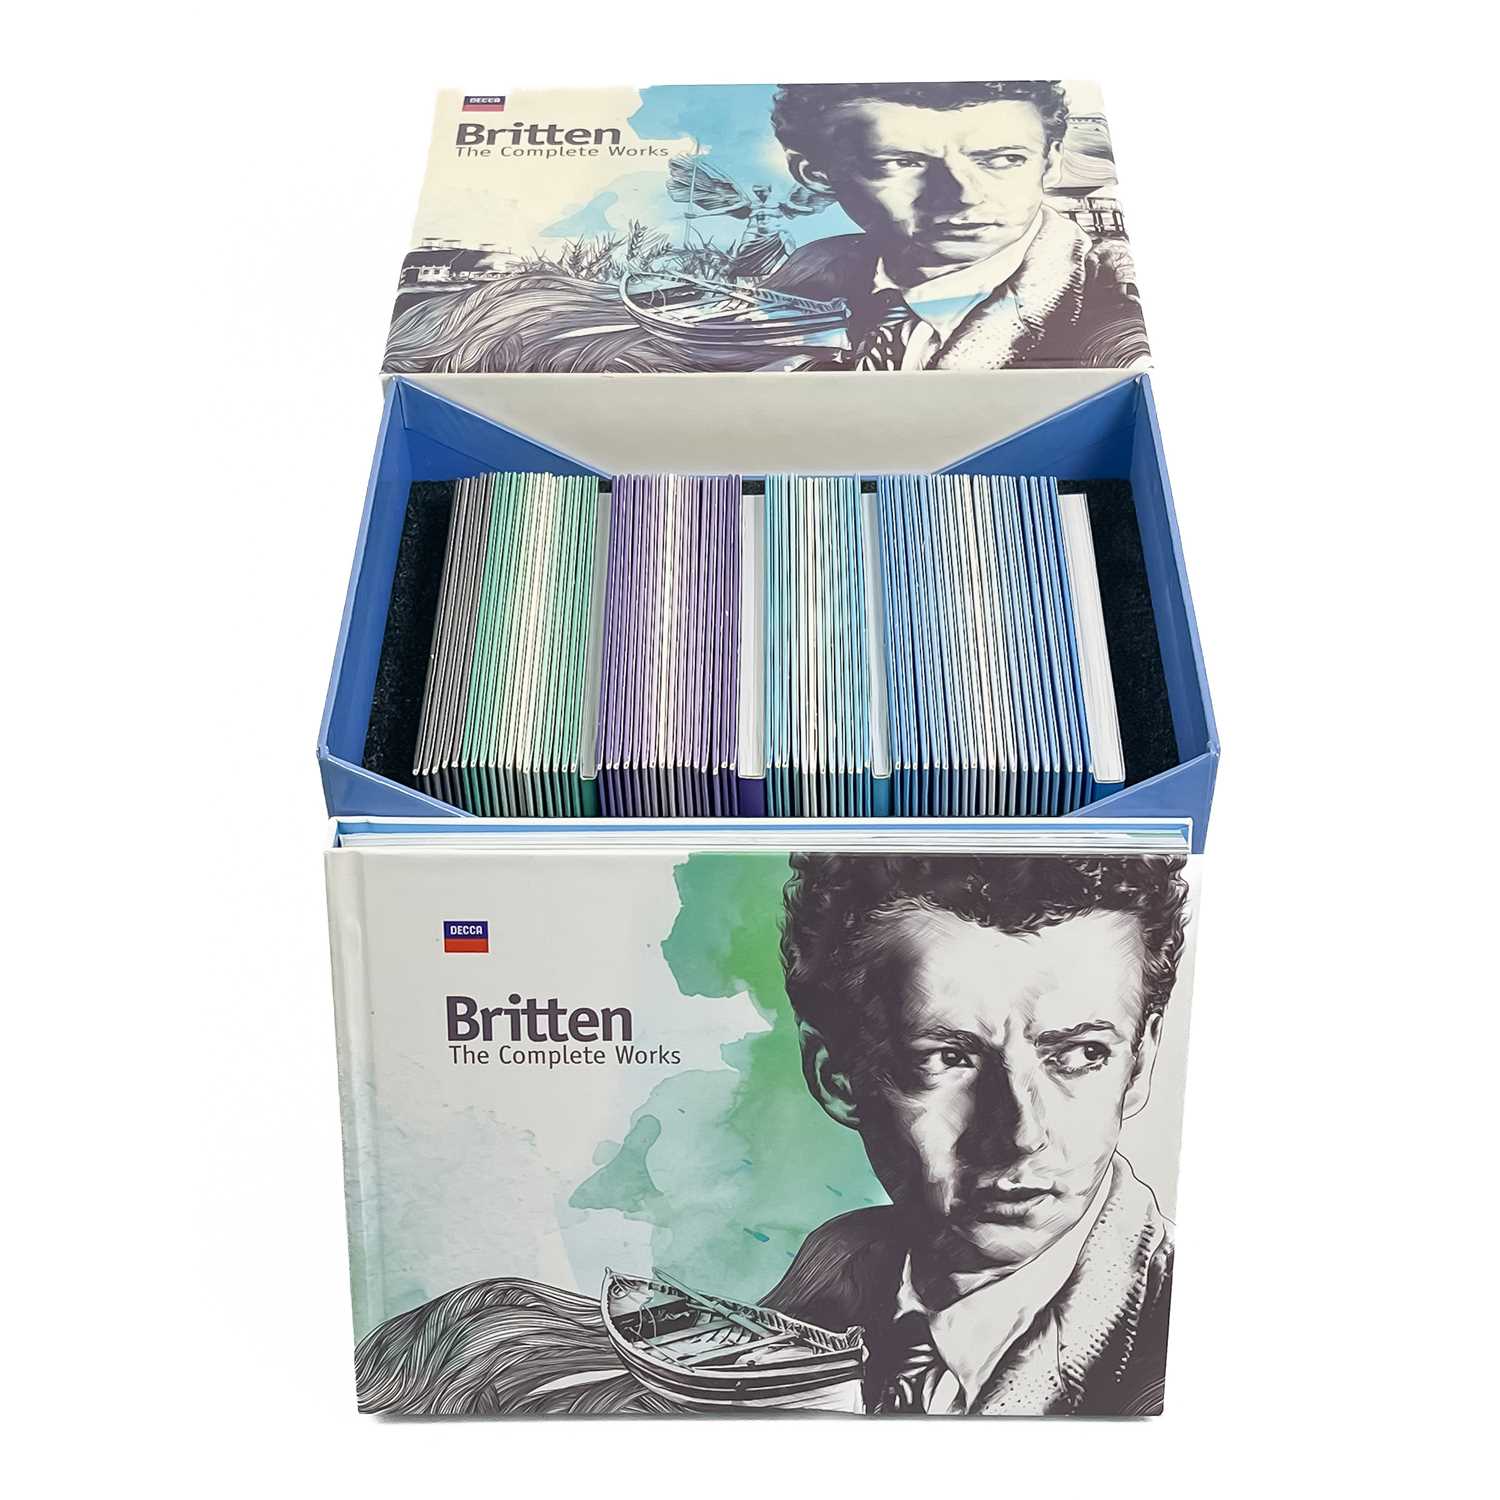 Britten - The Complete Works Limited edition 329/3000. - Image 5 of 6